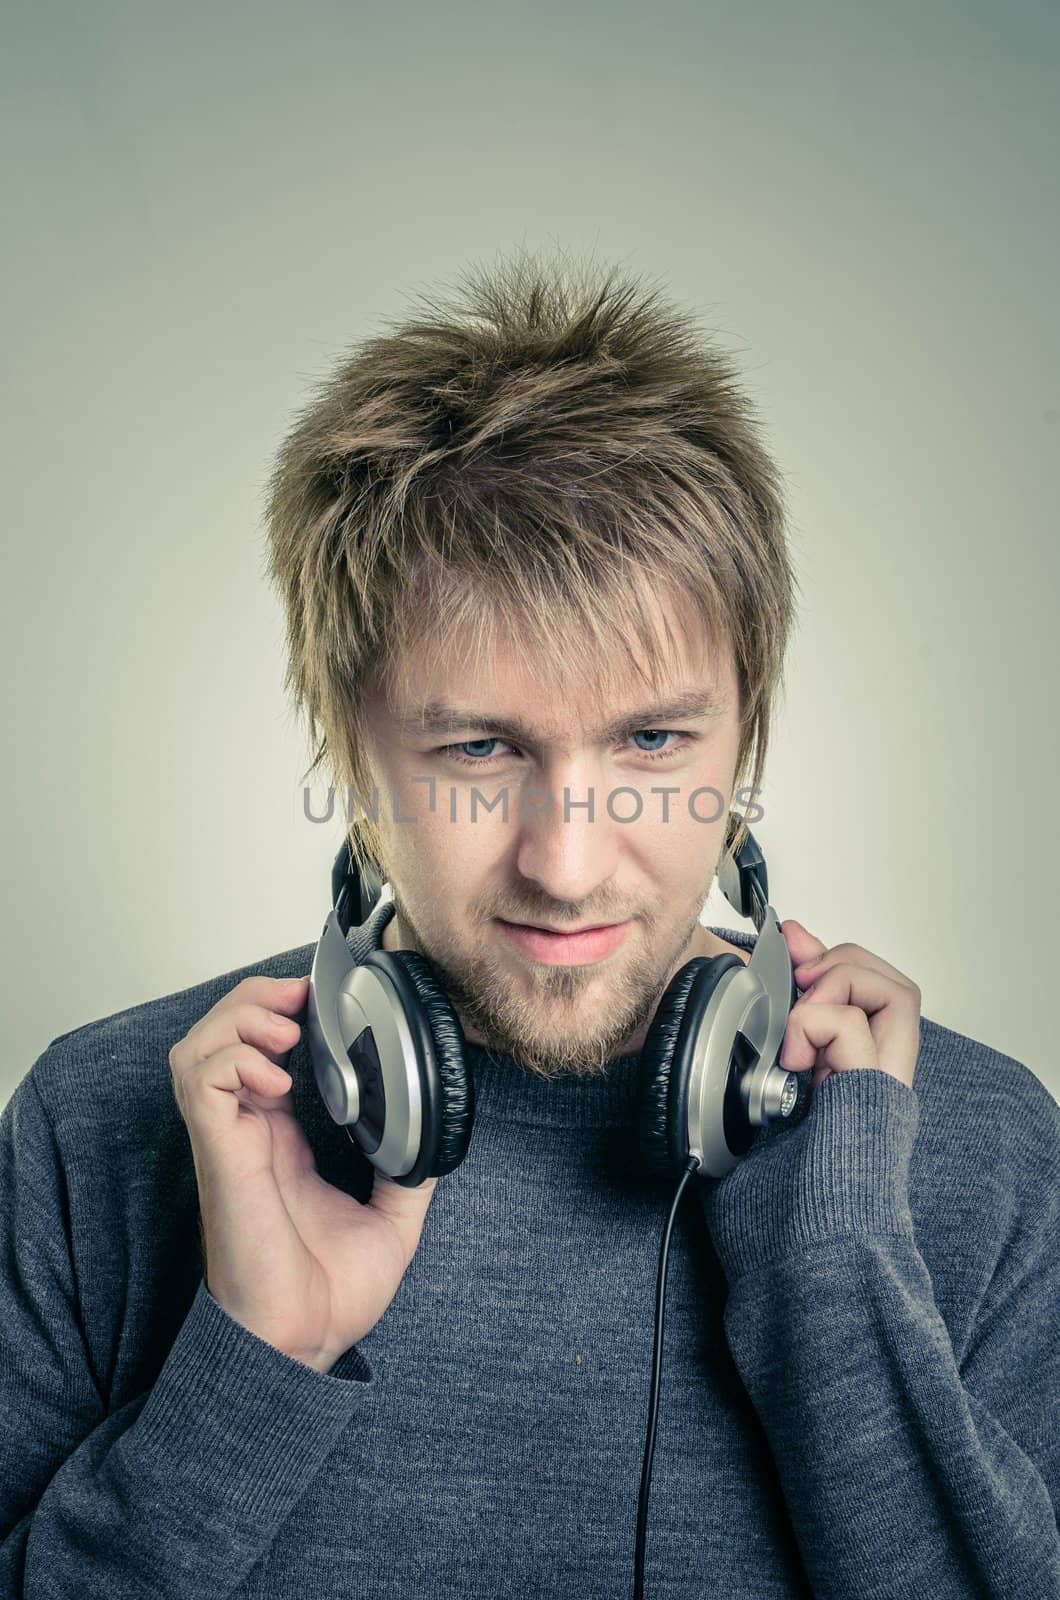 Young man with headphones against white background